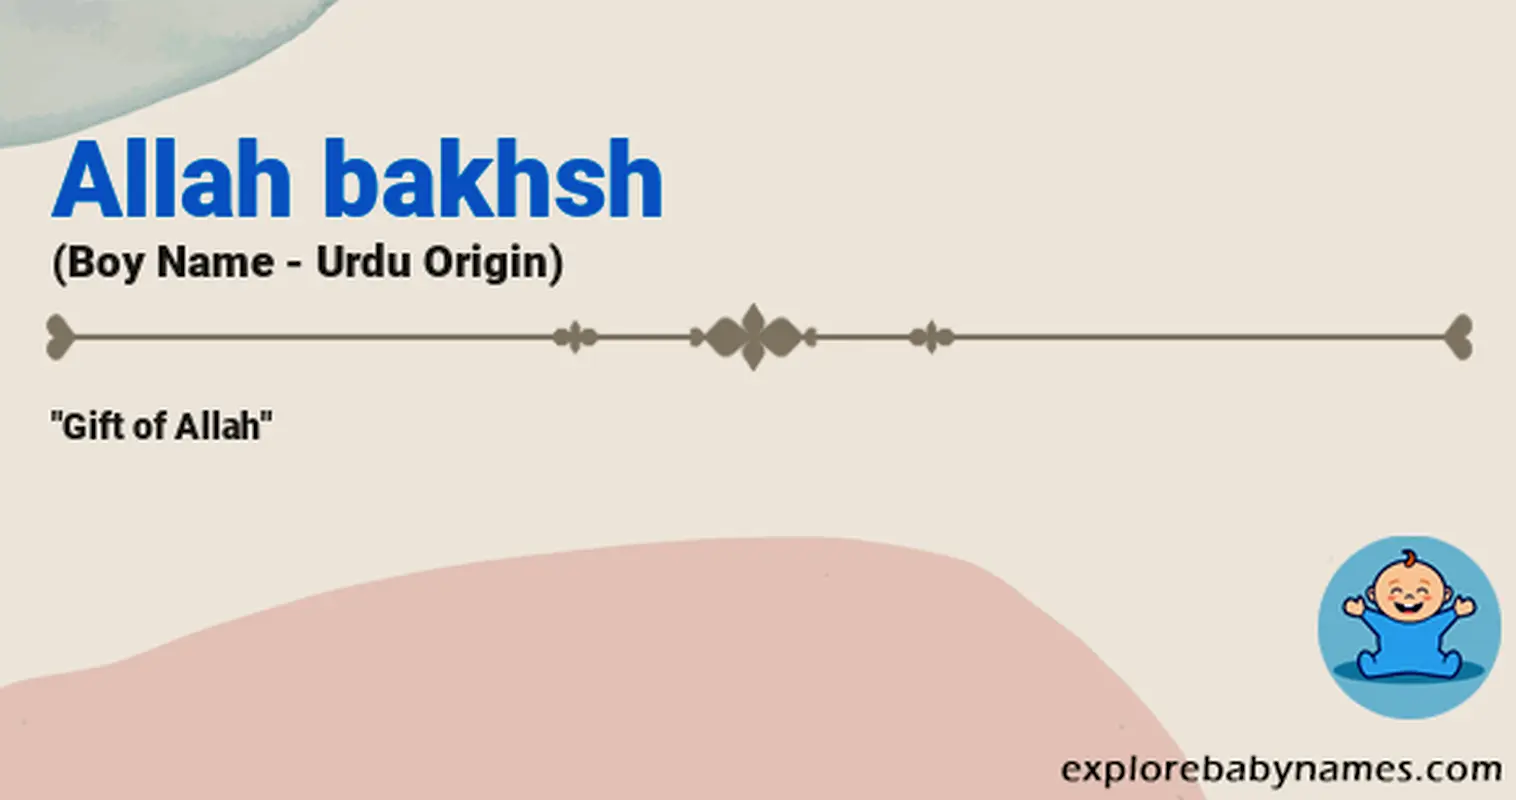 Meaning of Allah bakhsh